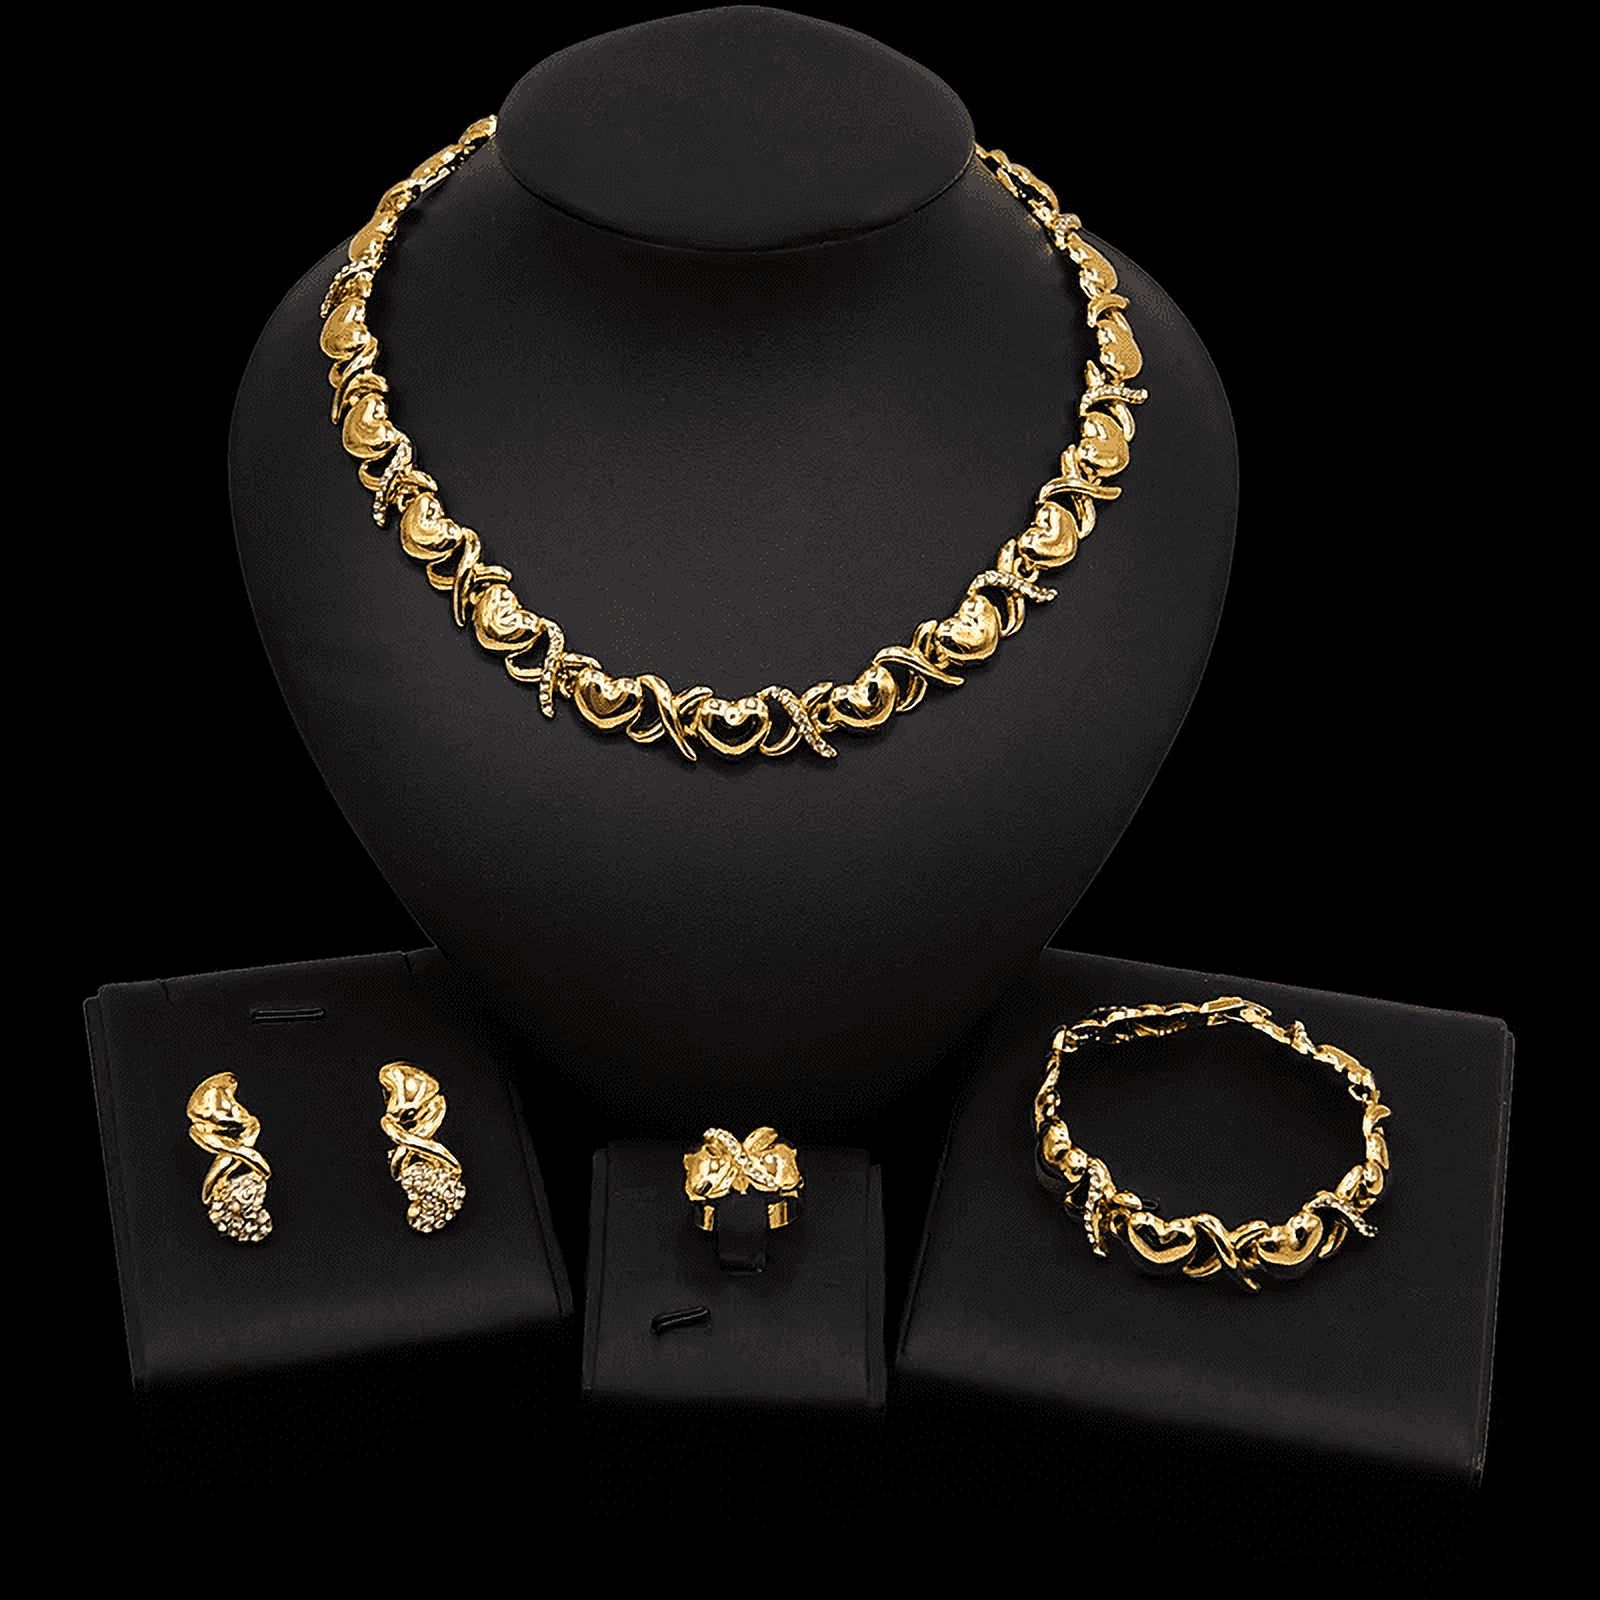 Women's Girls Hugs & Kisses XoXo Jewelry Set Real Gold Plated Includes  Necklace Bracelet Earring and Ring #76